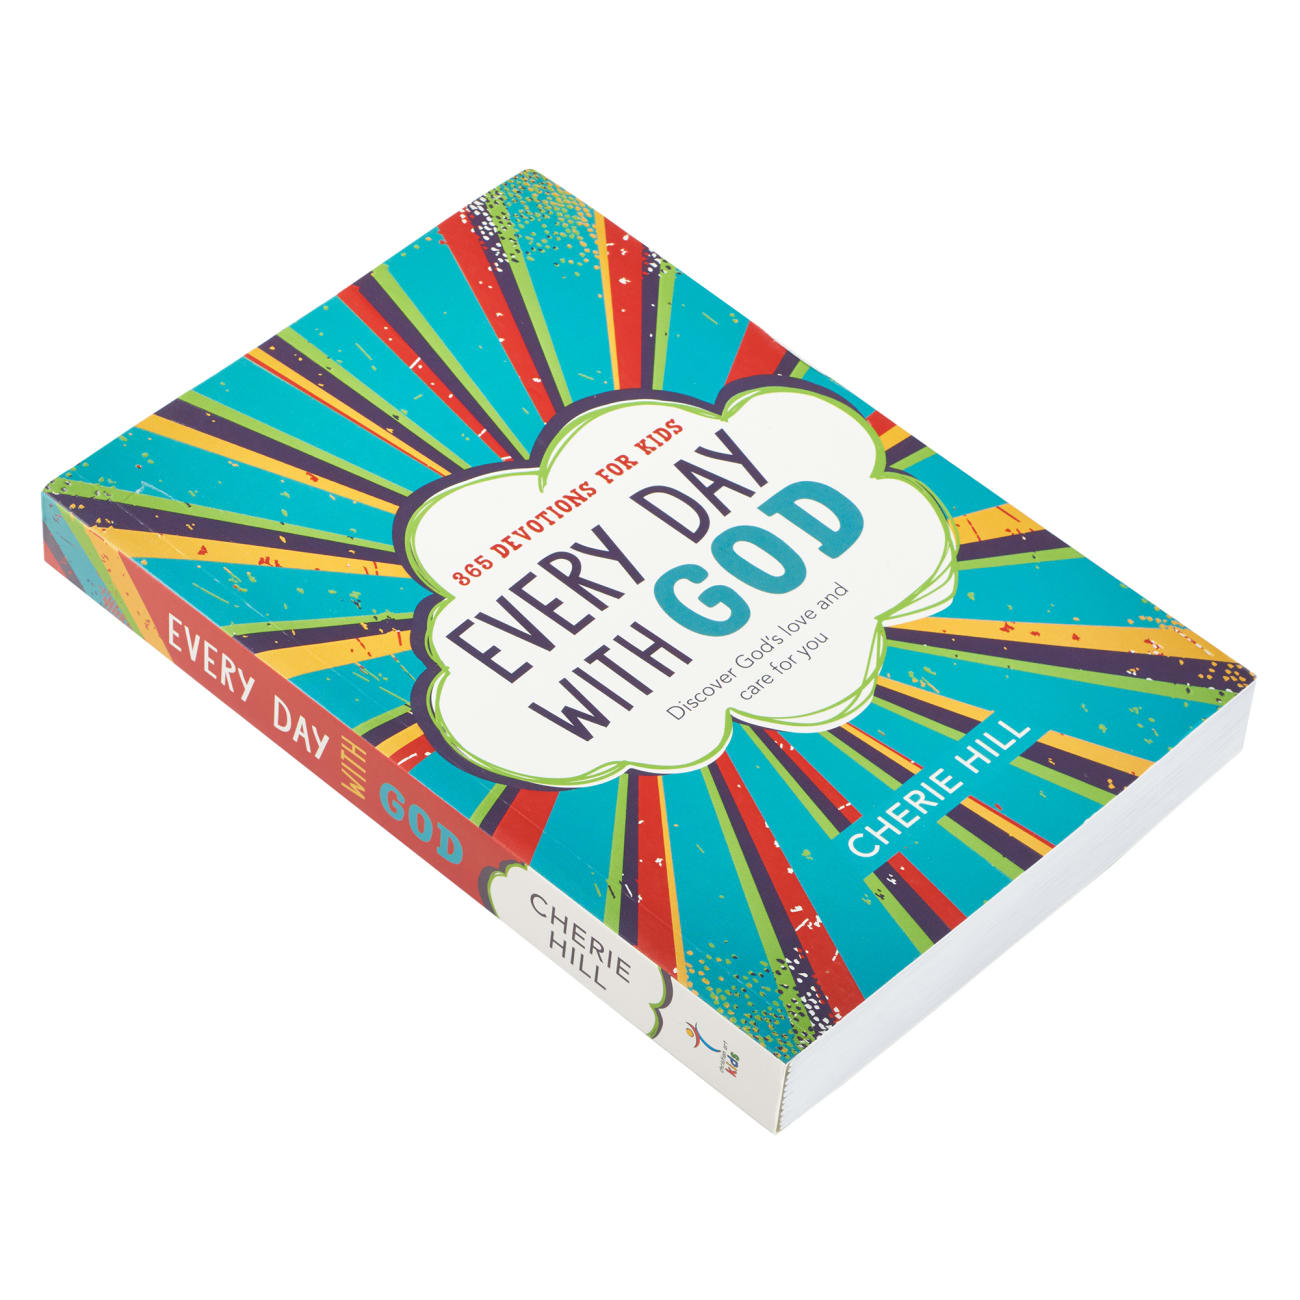 Every Day With God: 366 Devotions For Kids - Discover God's Love and Care For You Paperback